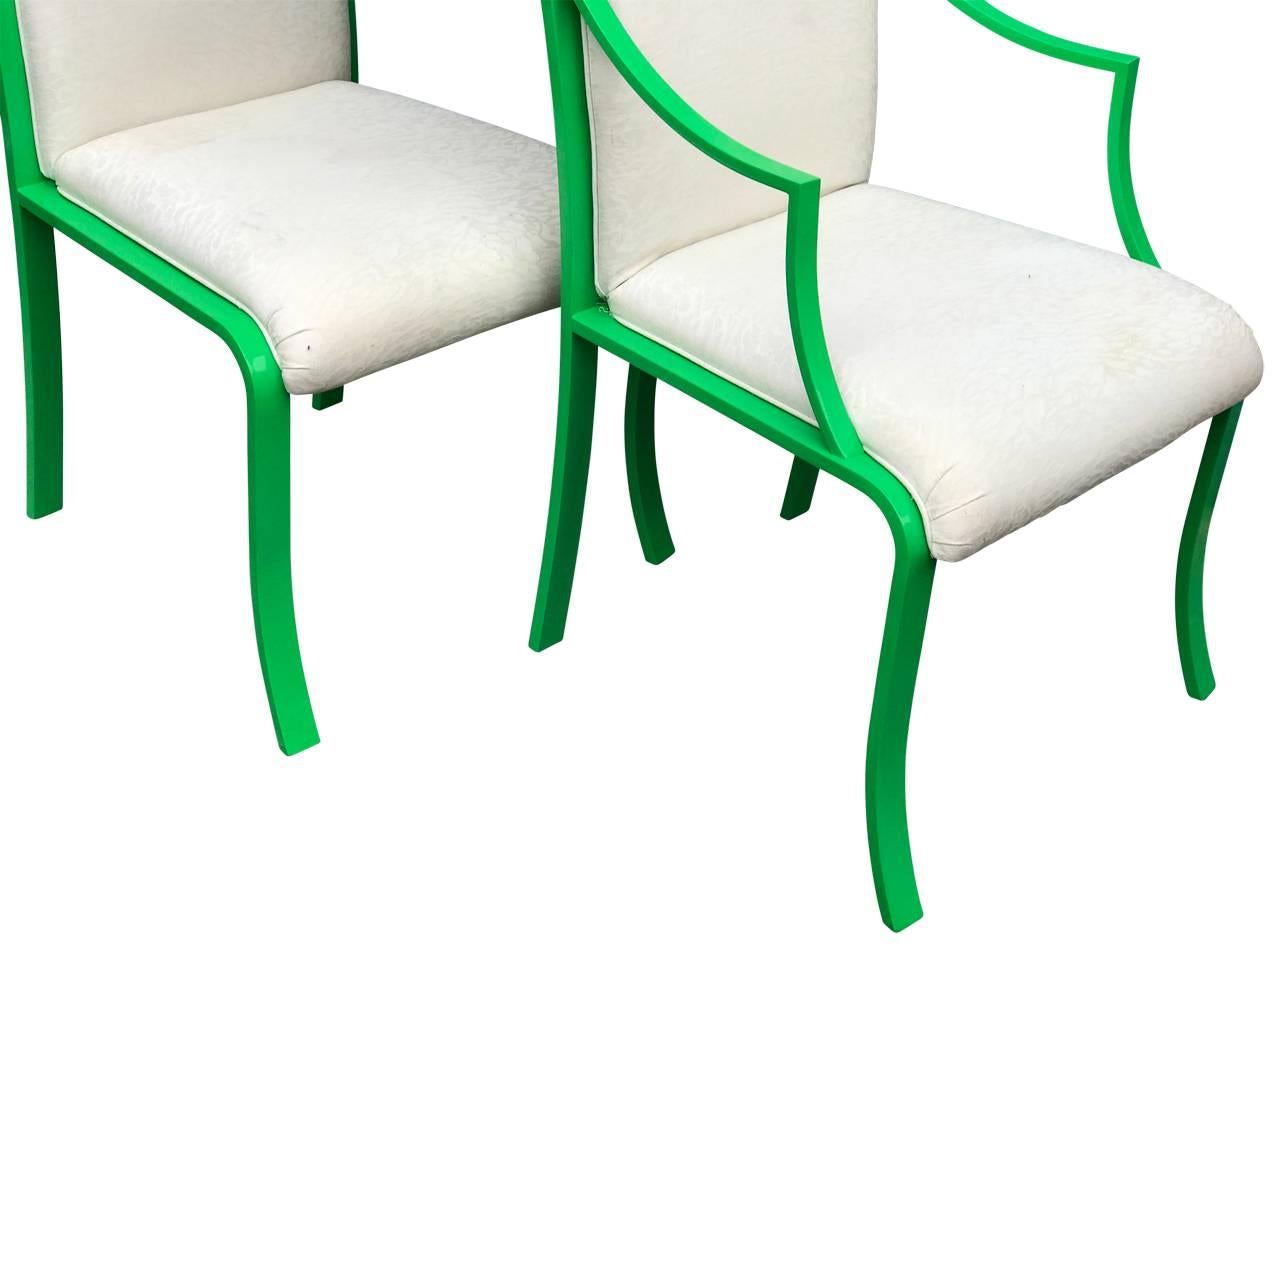 Mid-20th Century Set of 6 Mid-Century Modern Green Powder-coated Dining Chairs